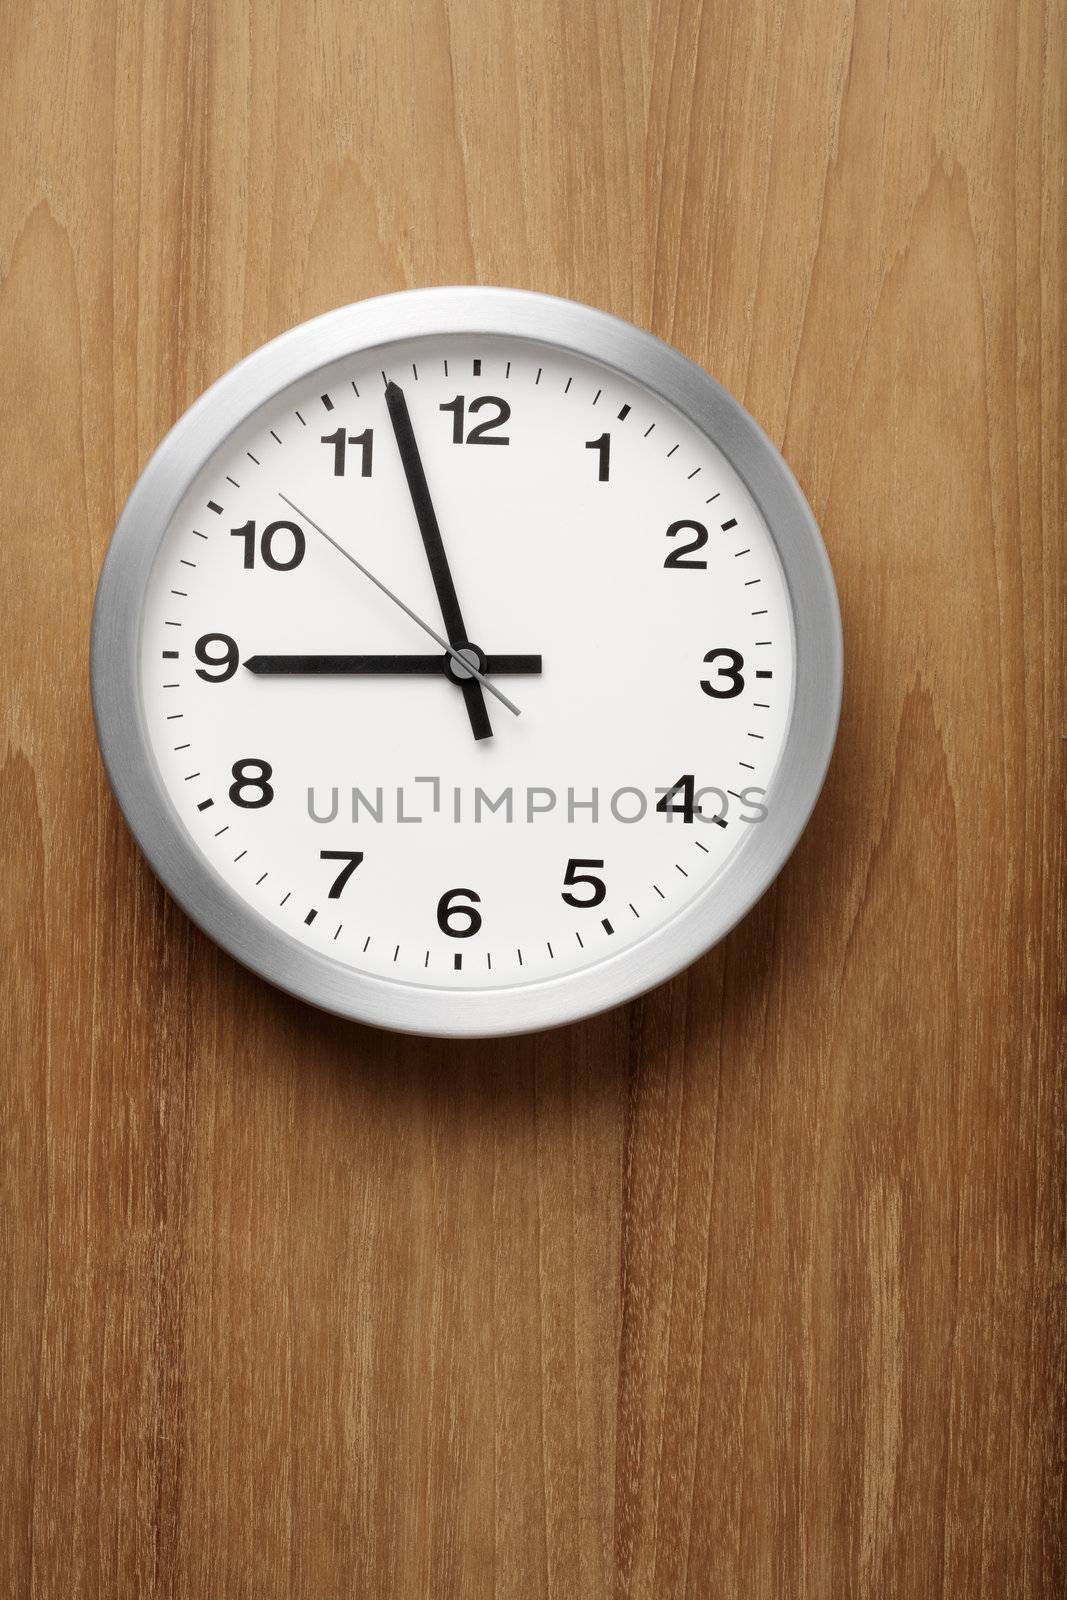 The aluminum wall clock is almost nine